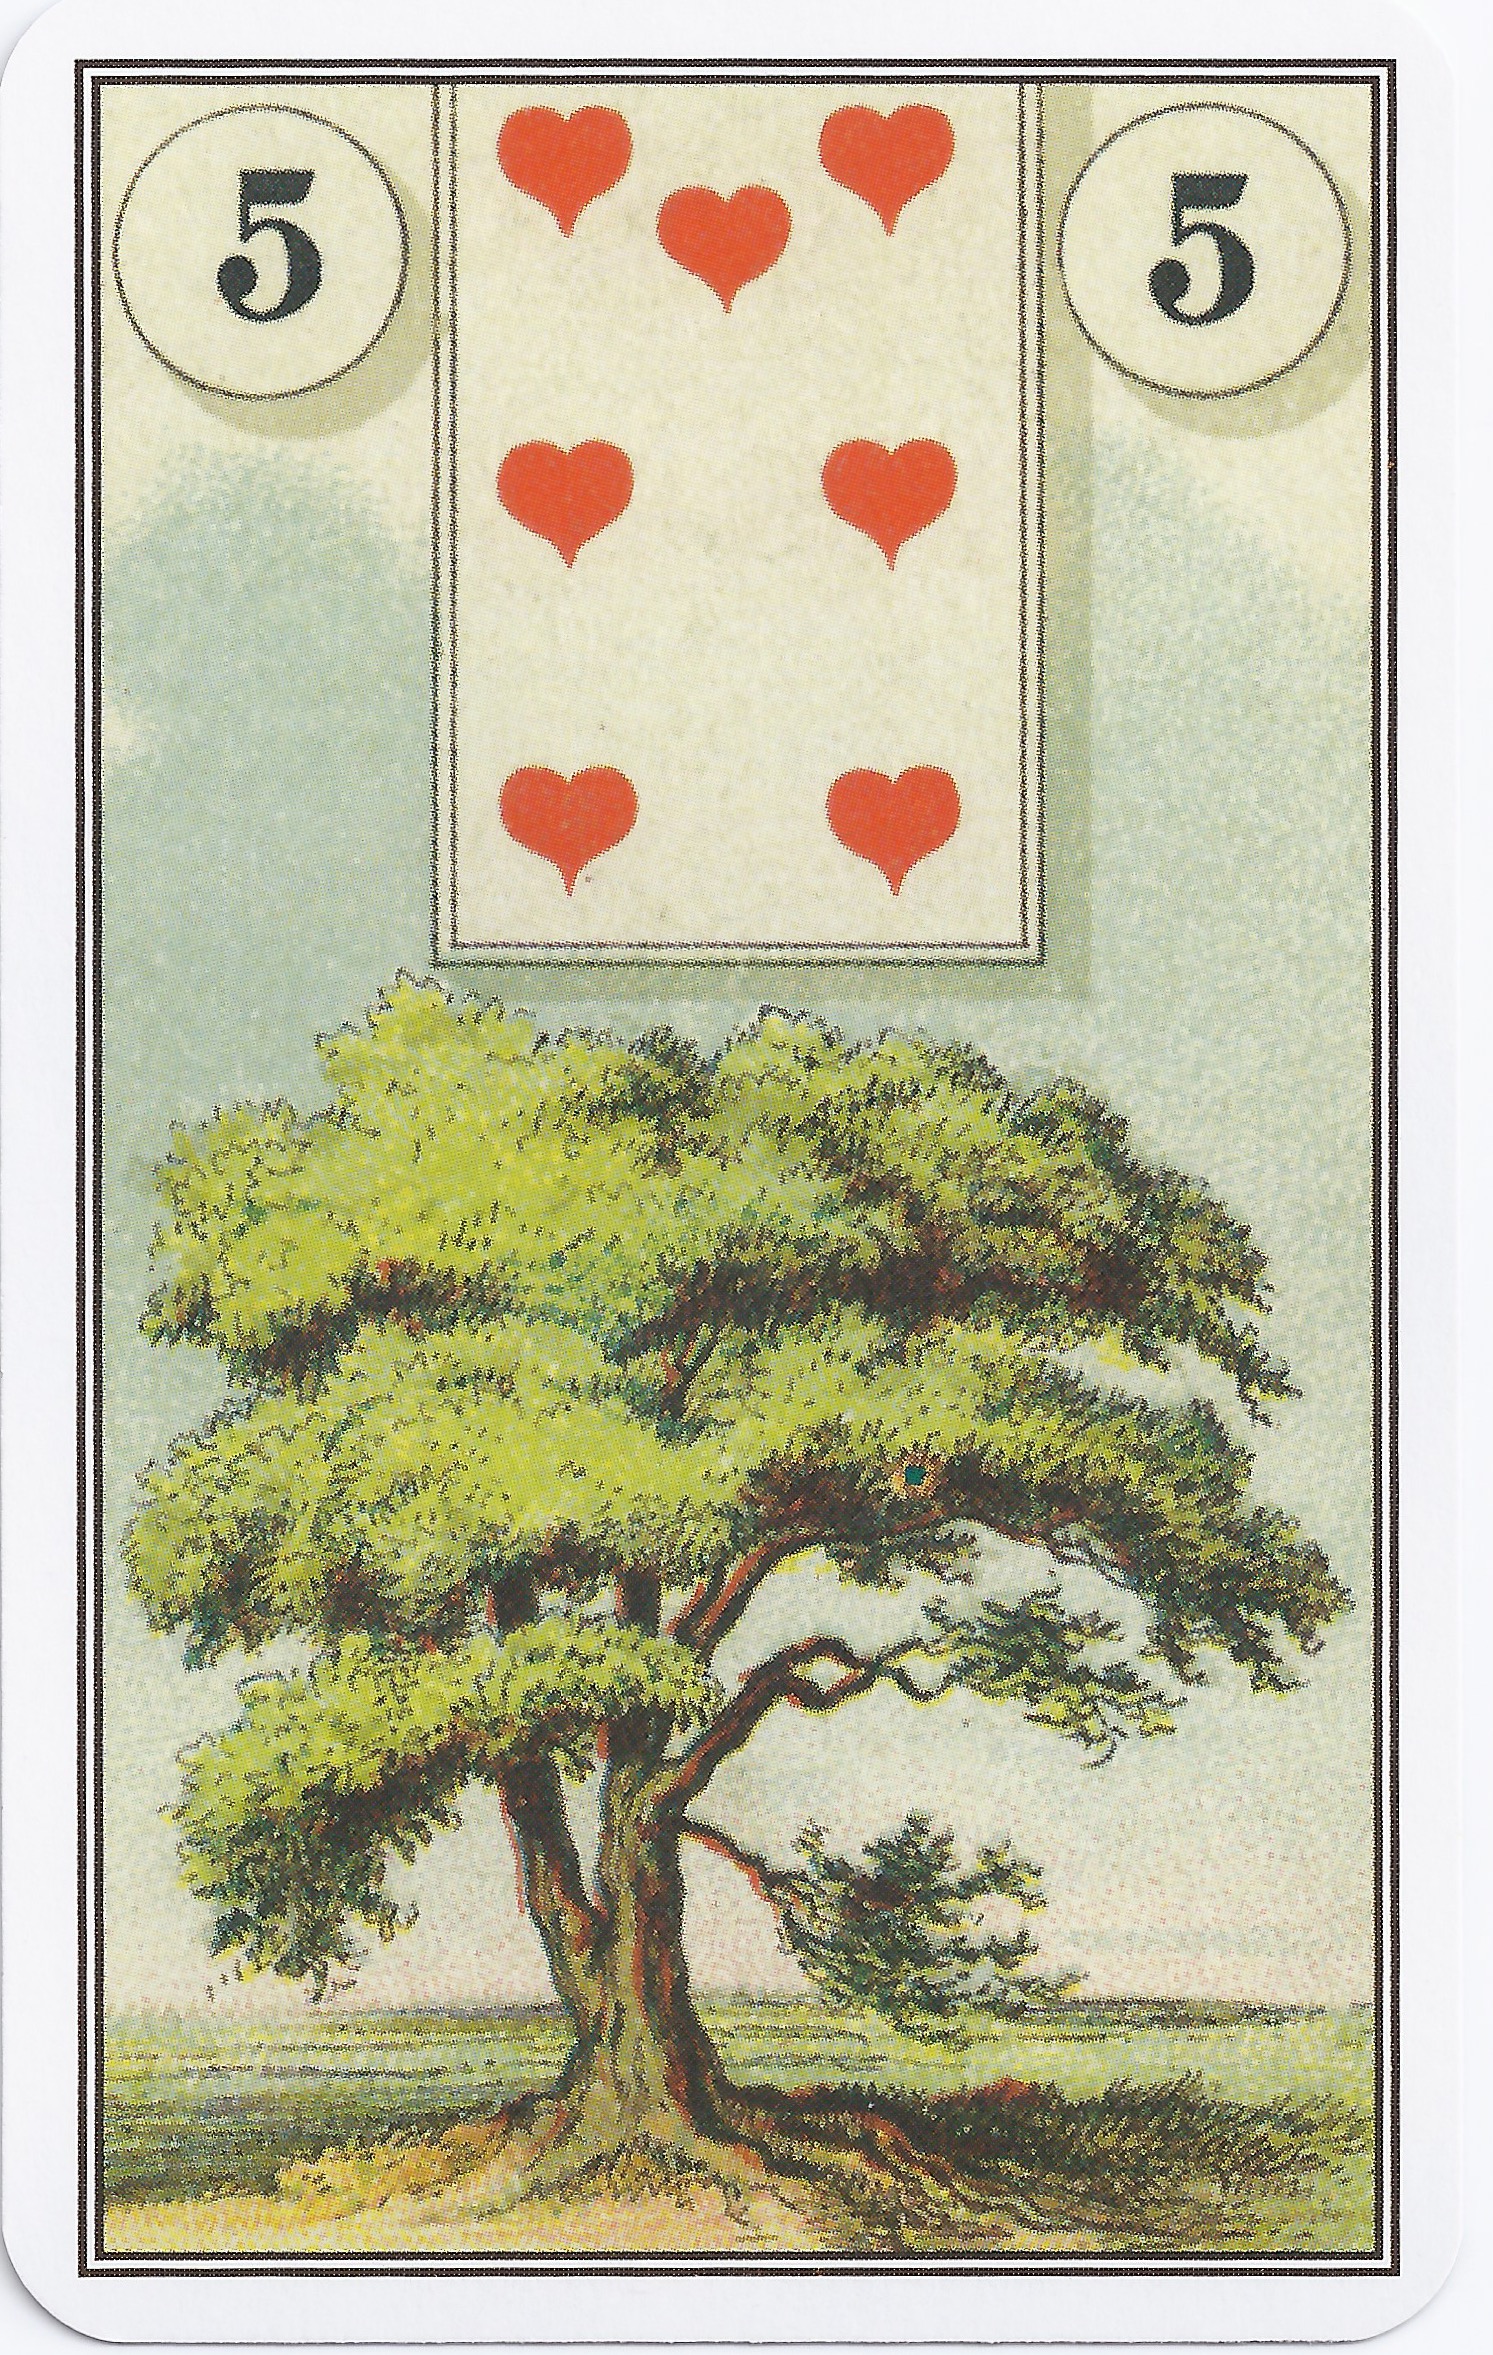 Learning the Lenormand Card Meanings